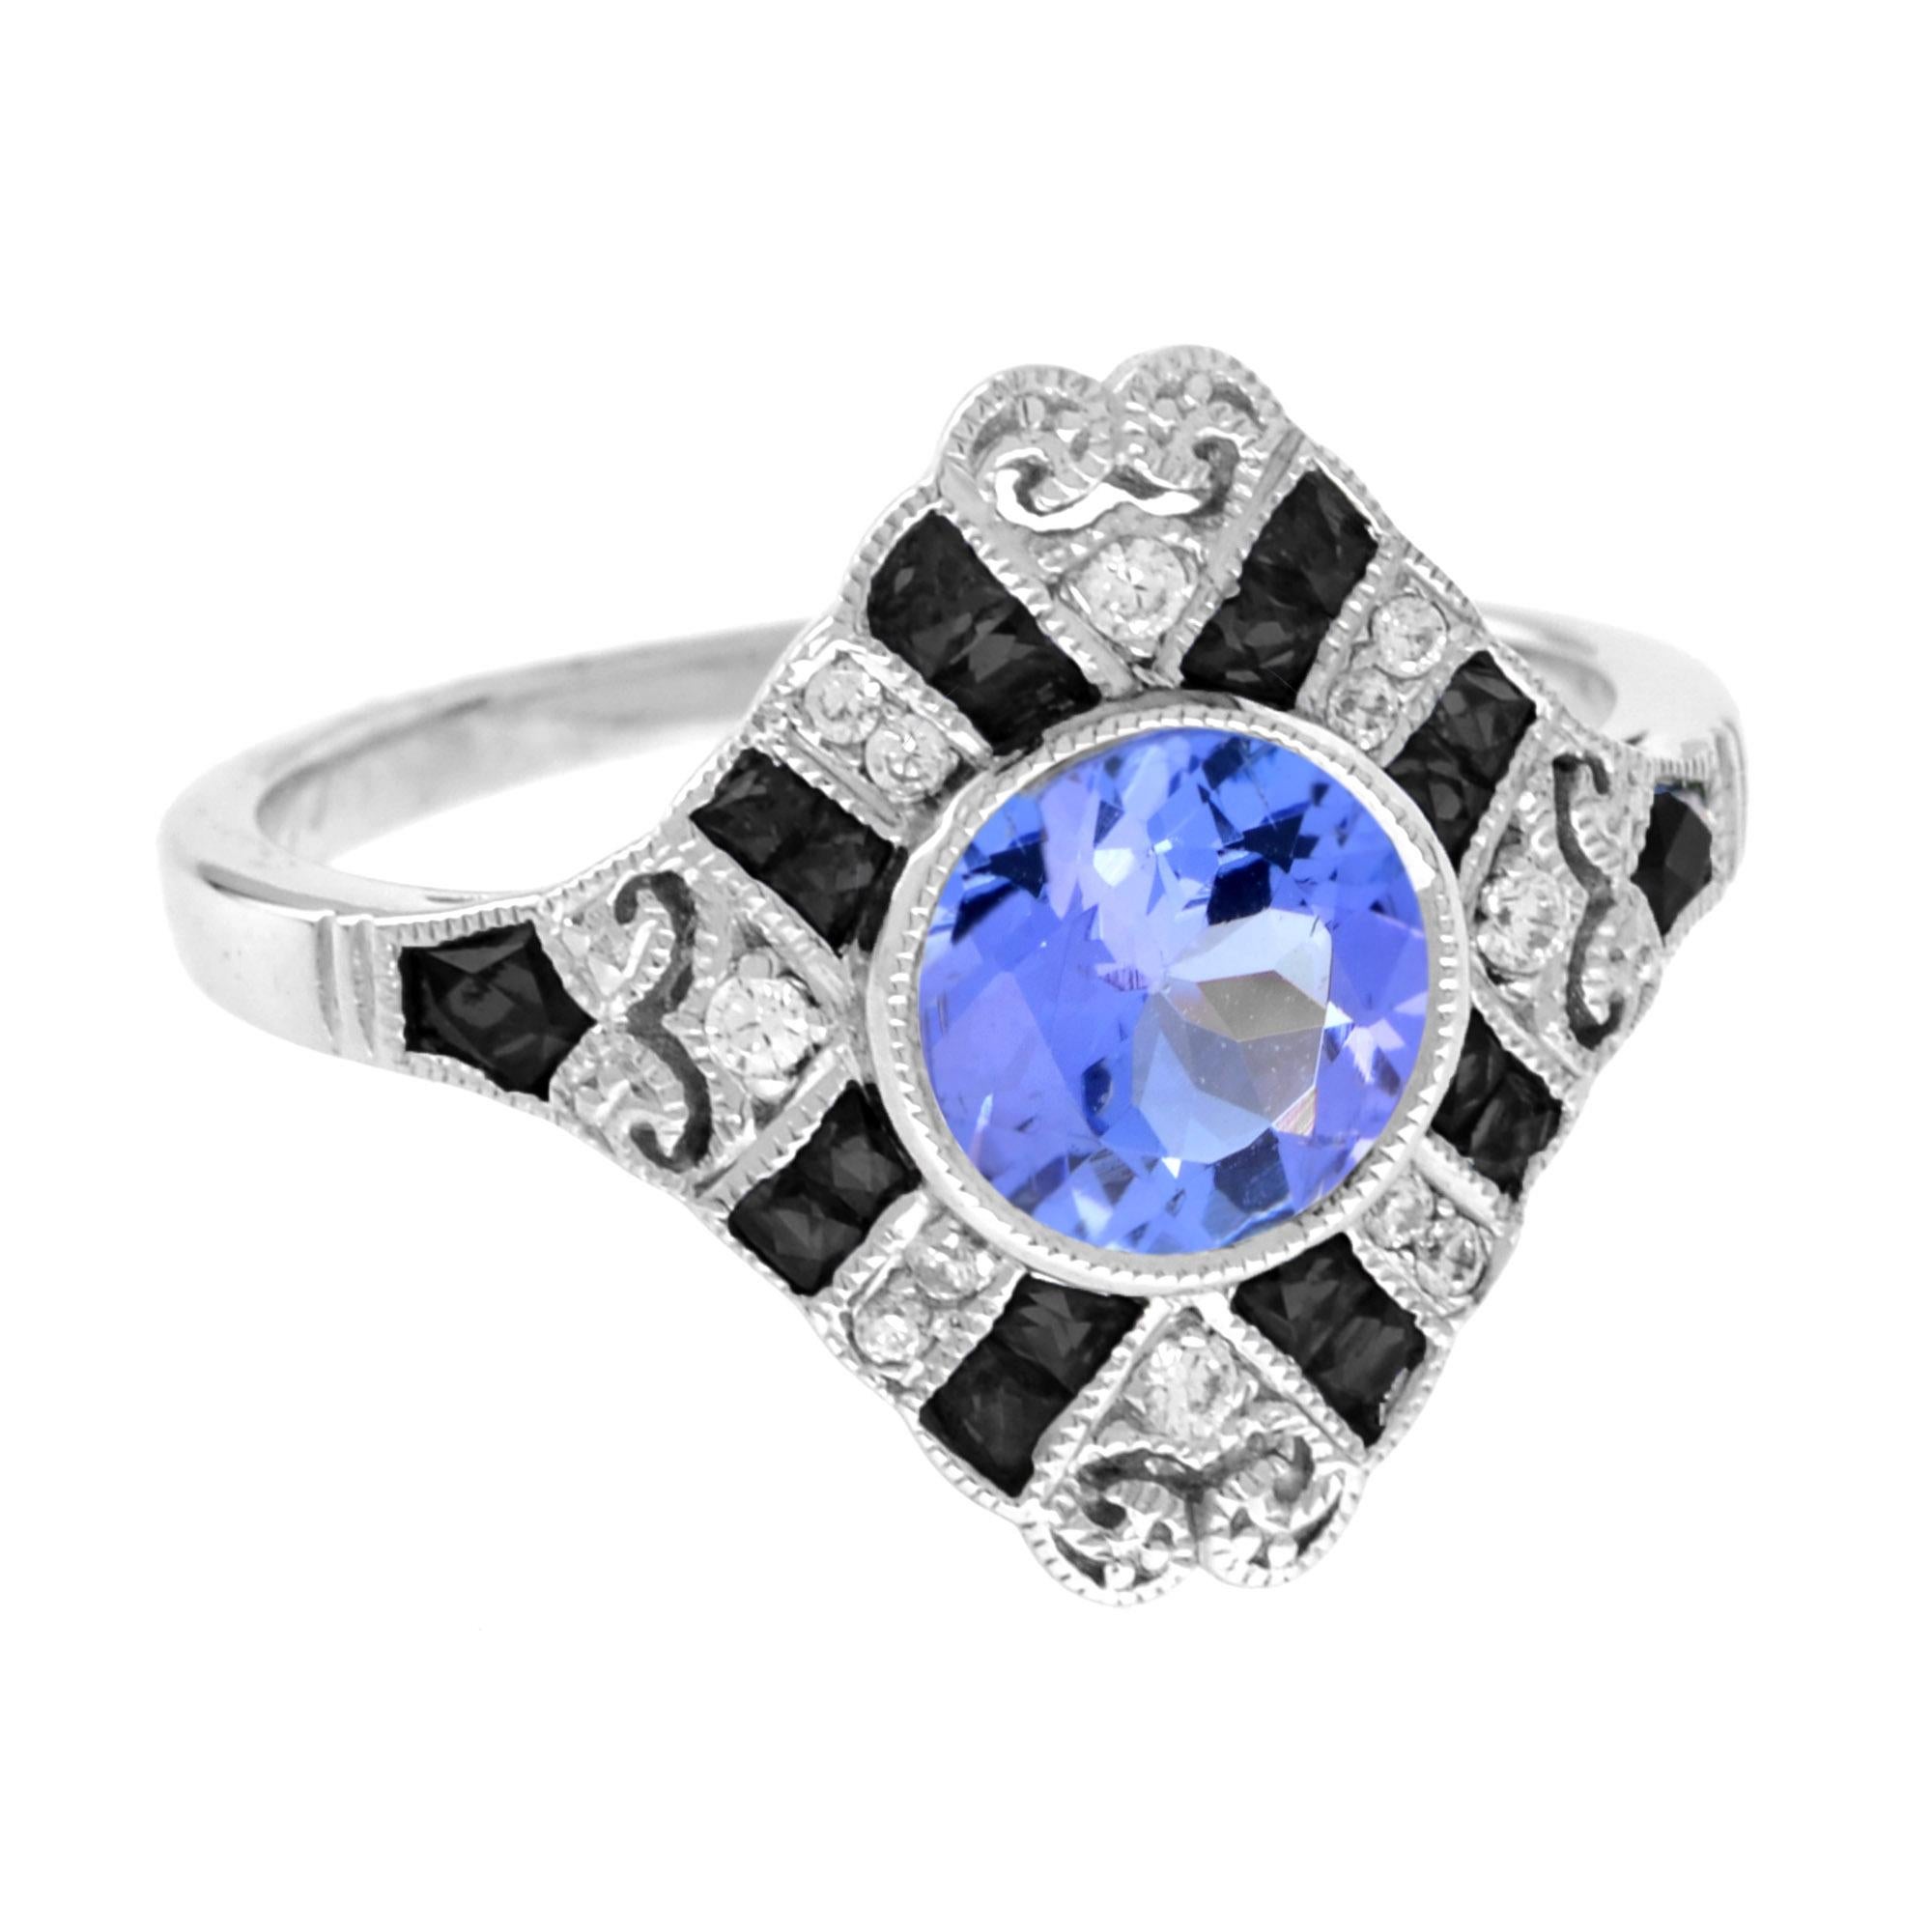 Round Cut Tanzanite Diamond and Onyx Art Deco Style Ring in 18K White Gold For Sale